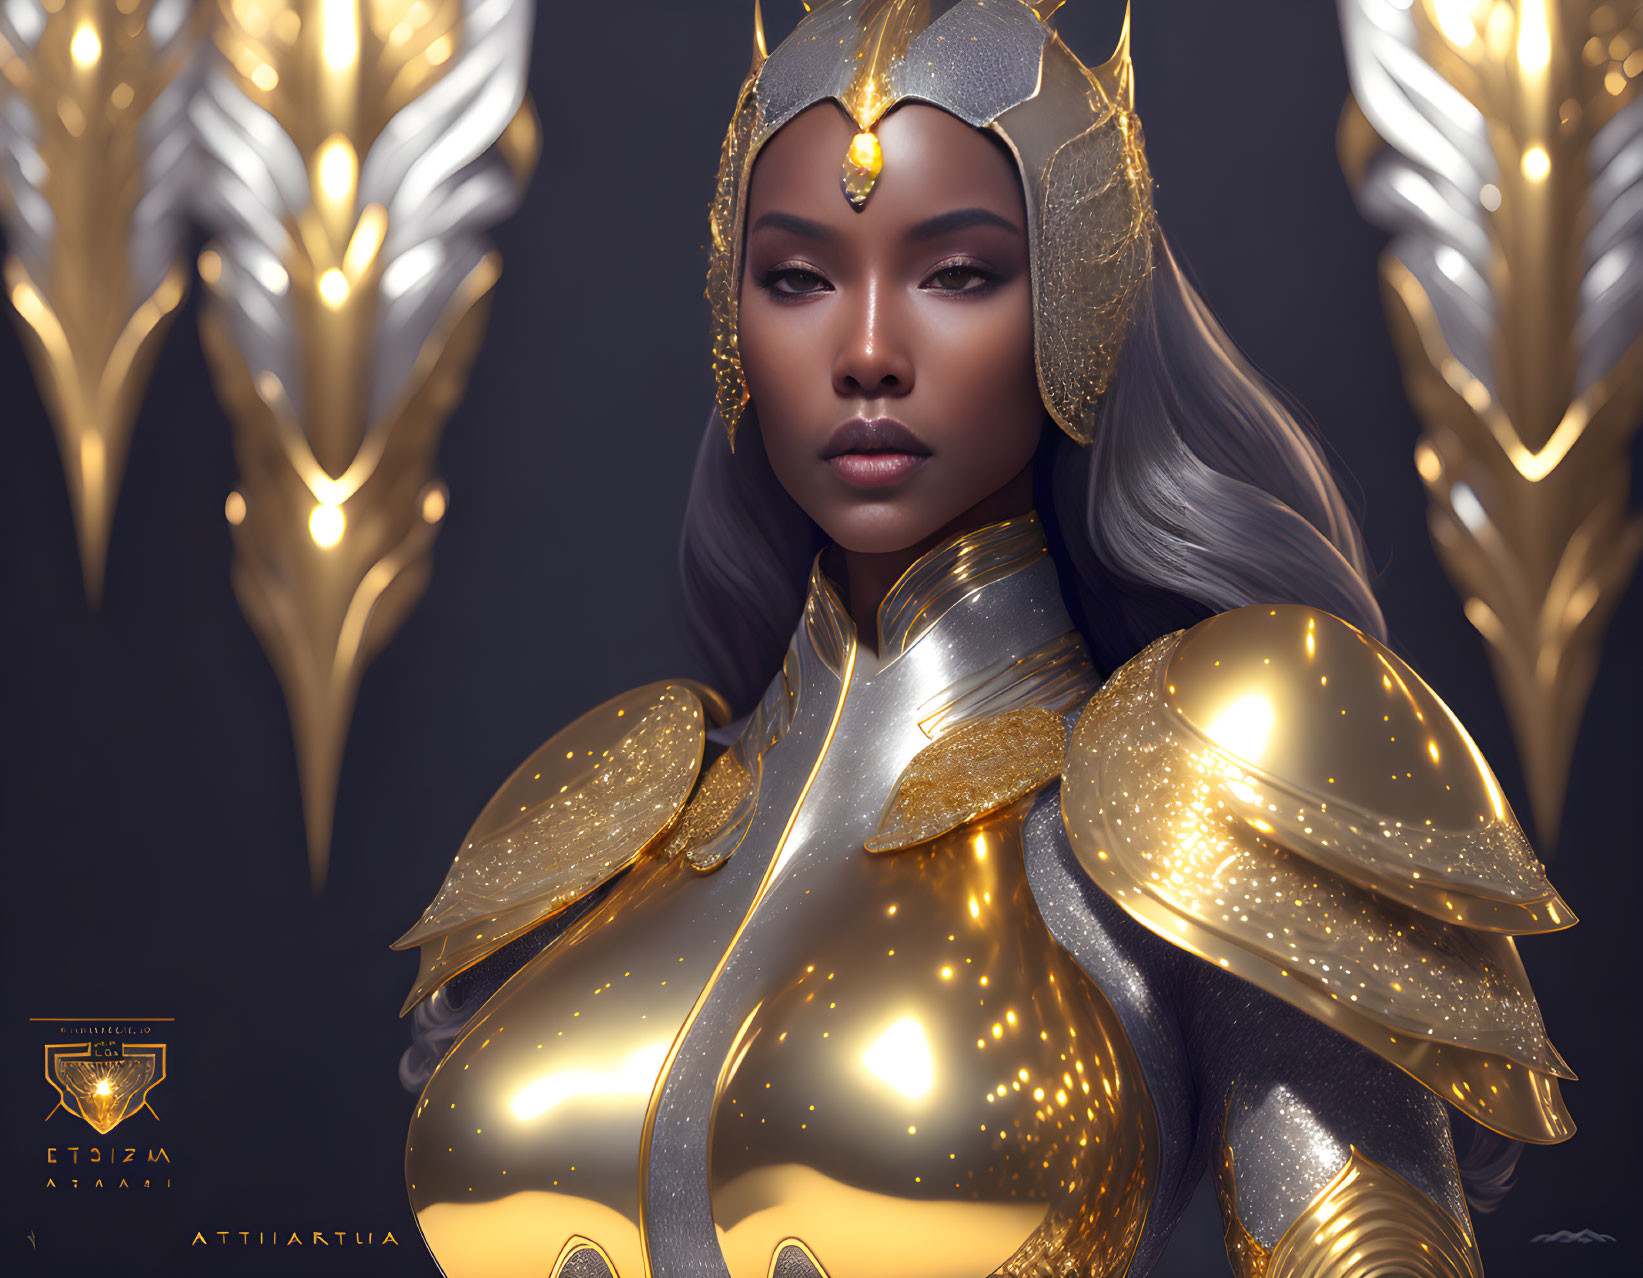 Digital artwork: Woman in golden armor and headdress, intricate designs, grey background